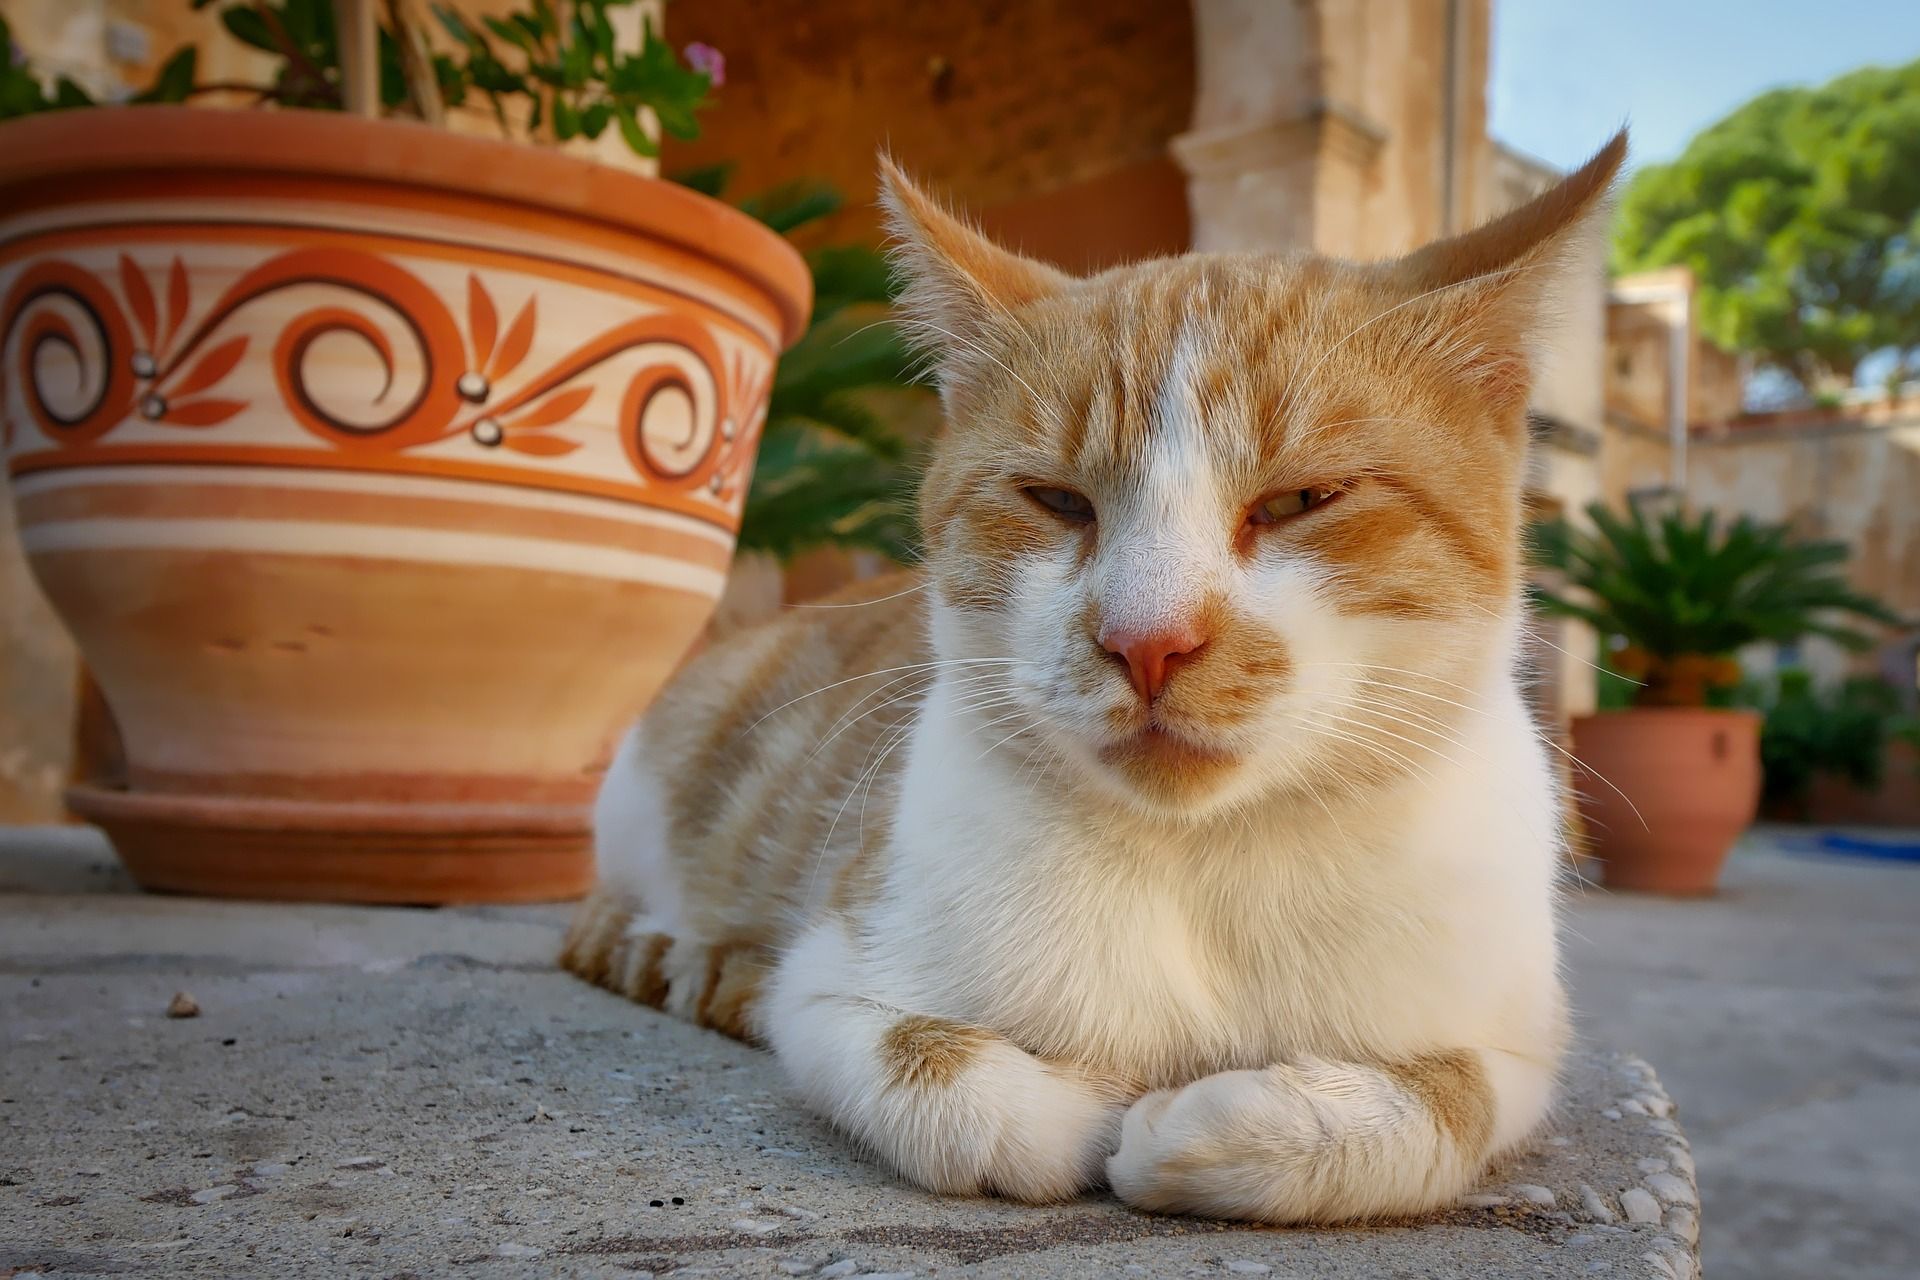 Adorable and lucky cat enjoying its life in Crete, Greece